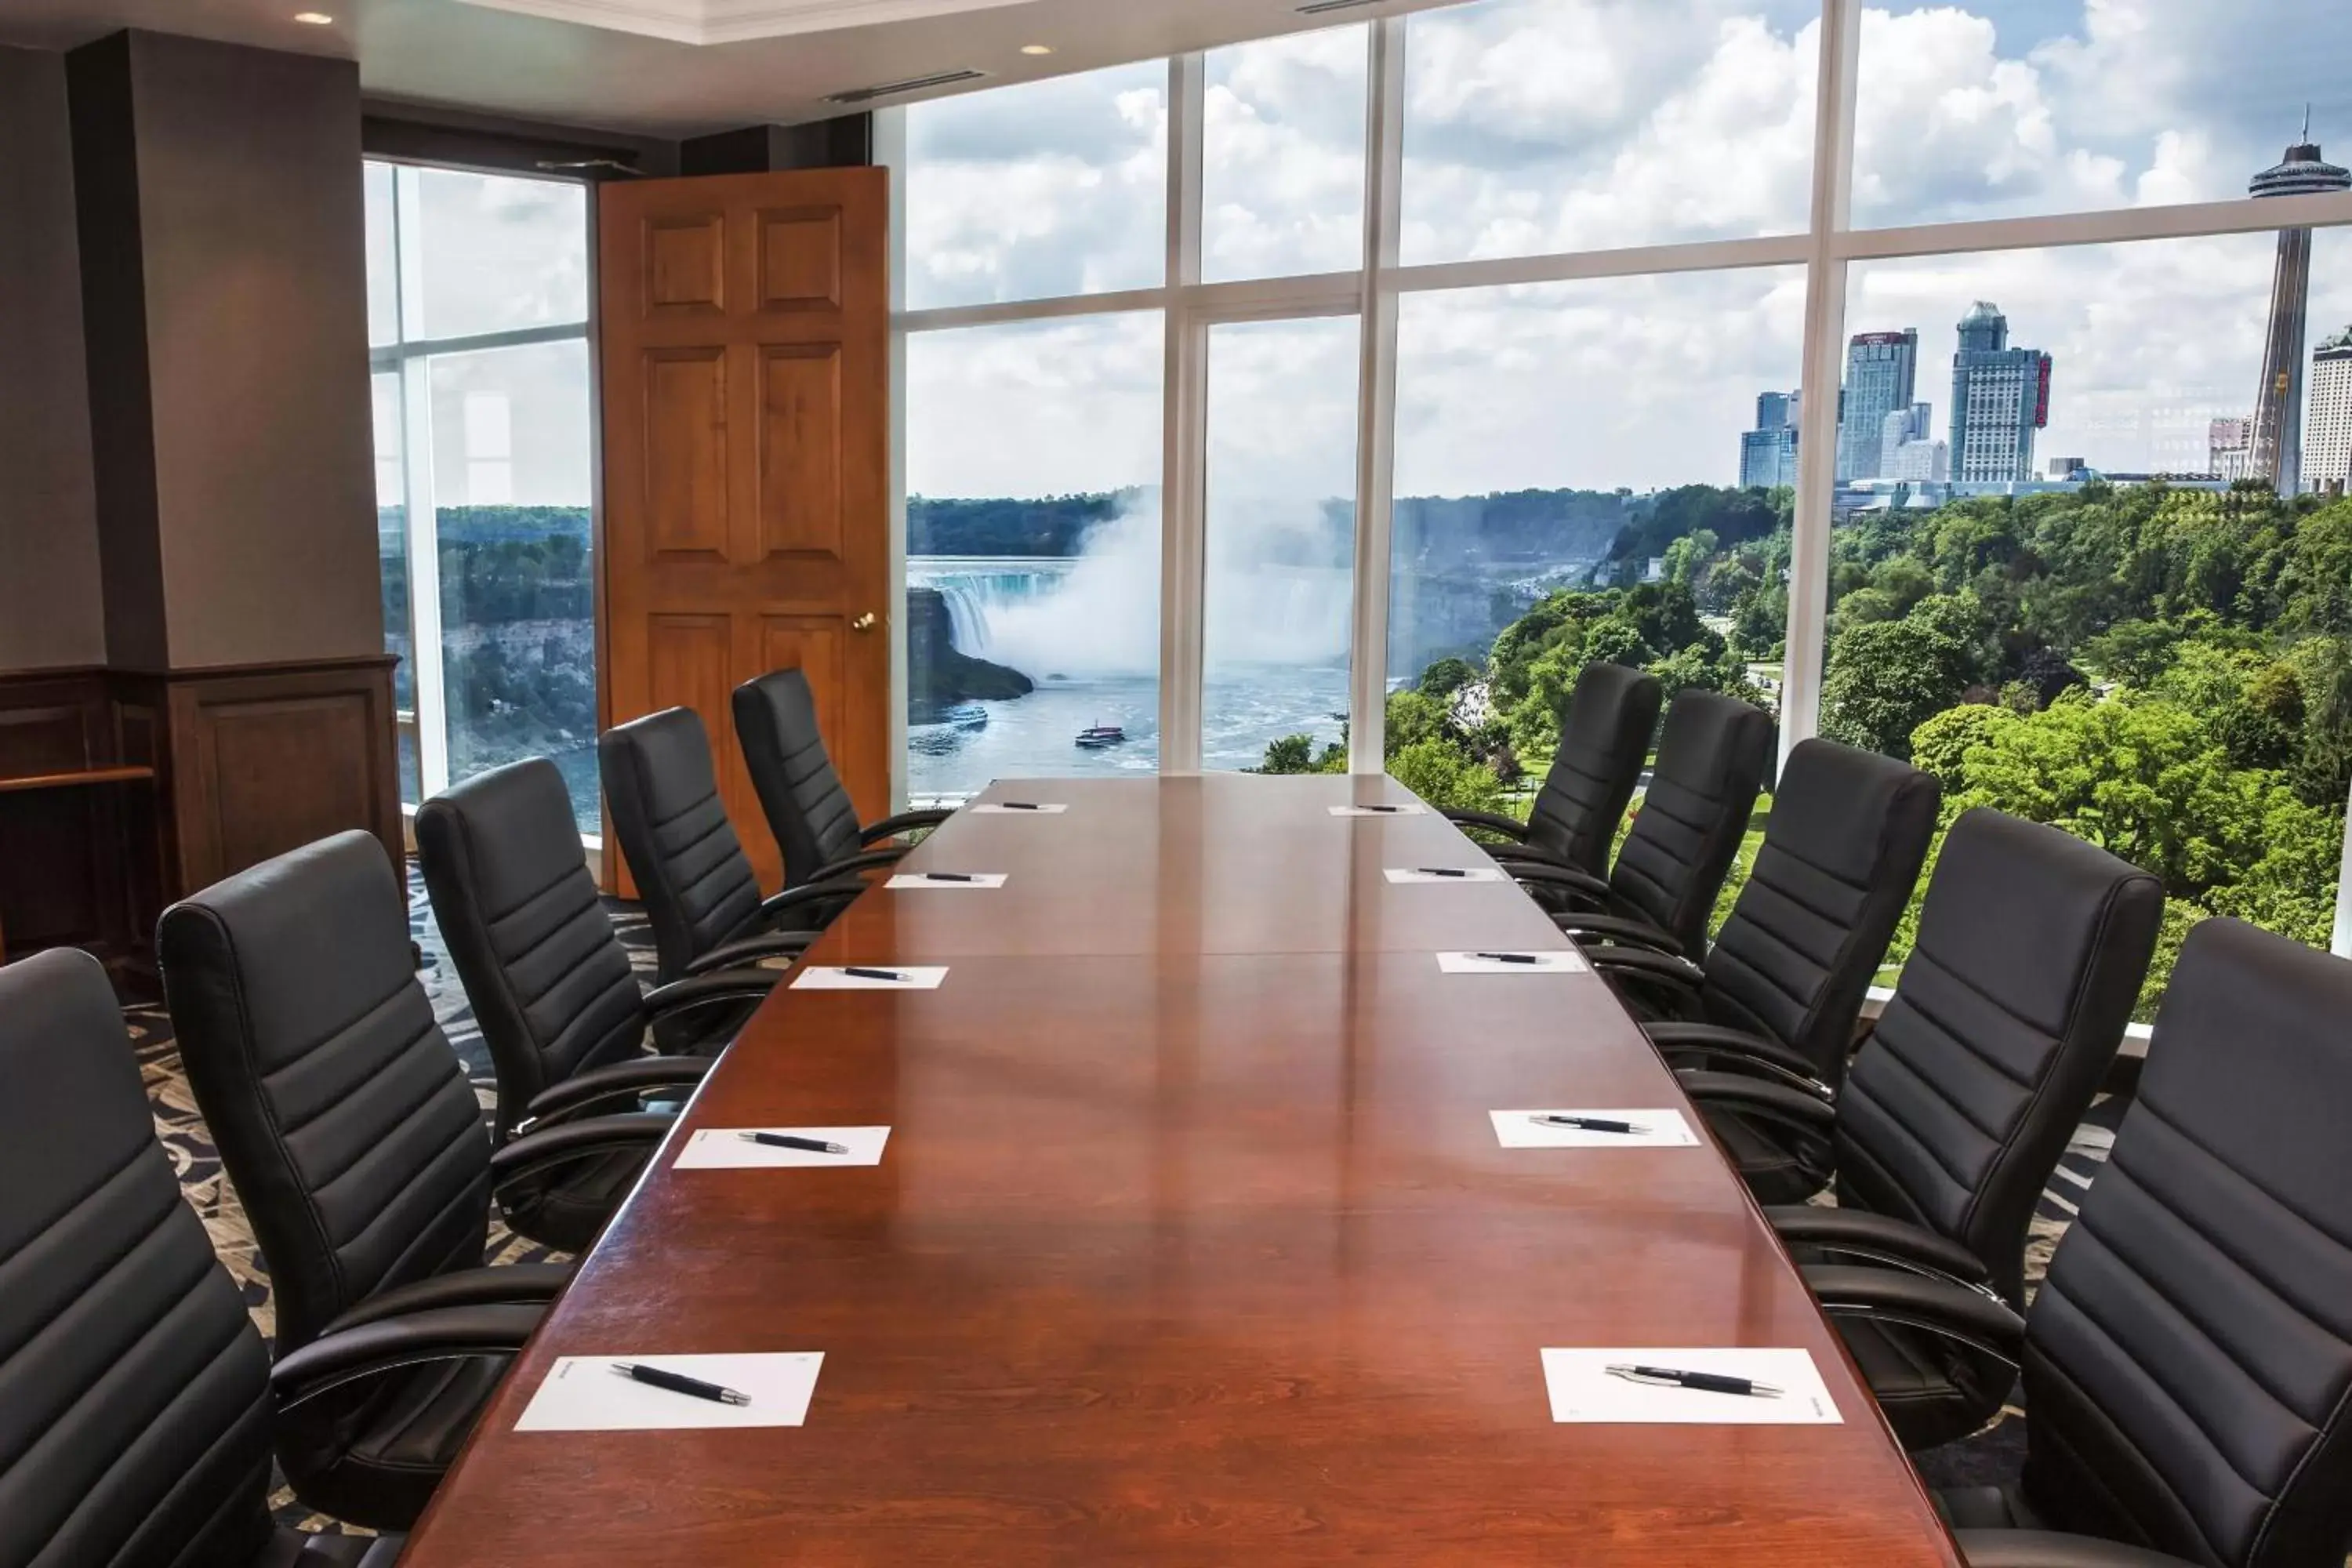 Meeting/conference room in Sheraton Fallsview Hotel